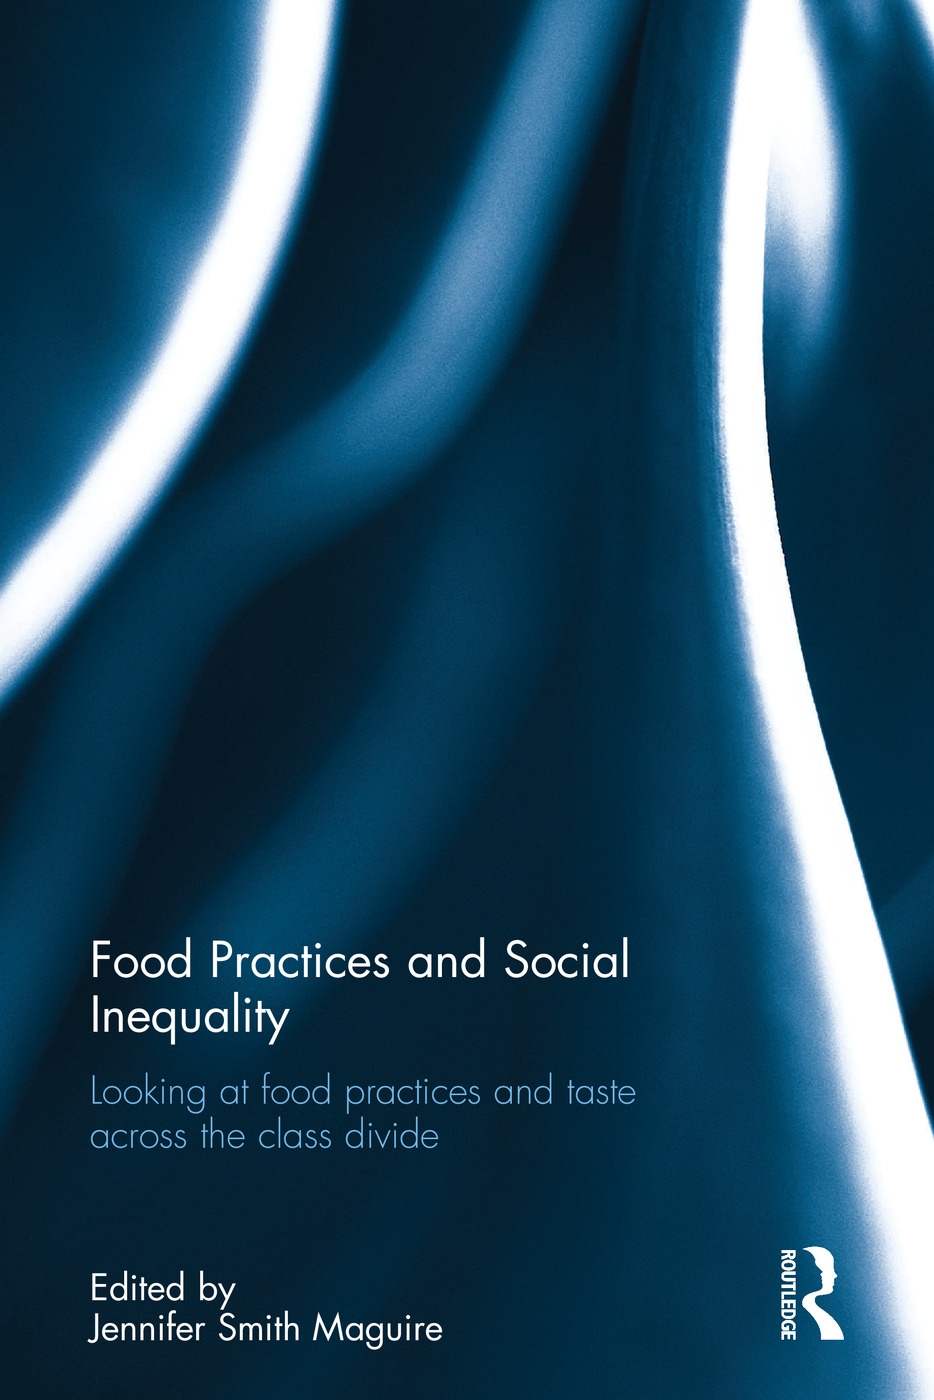 Food Practices and Social Inequality: Looking at Food Practices and Taste Across the Class Divide